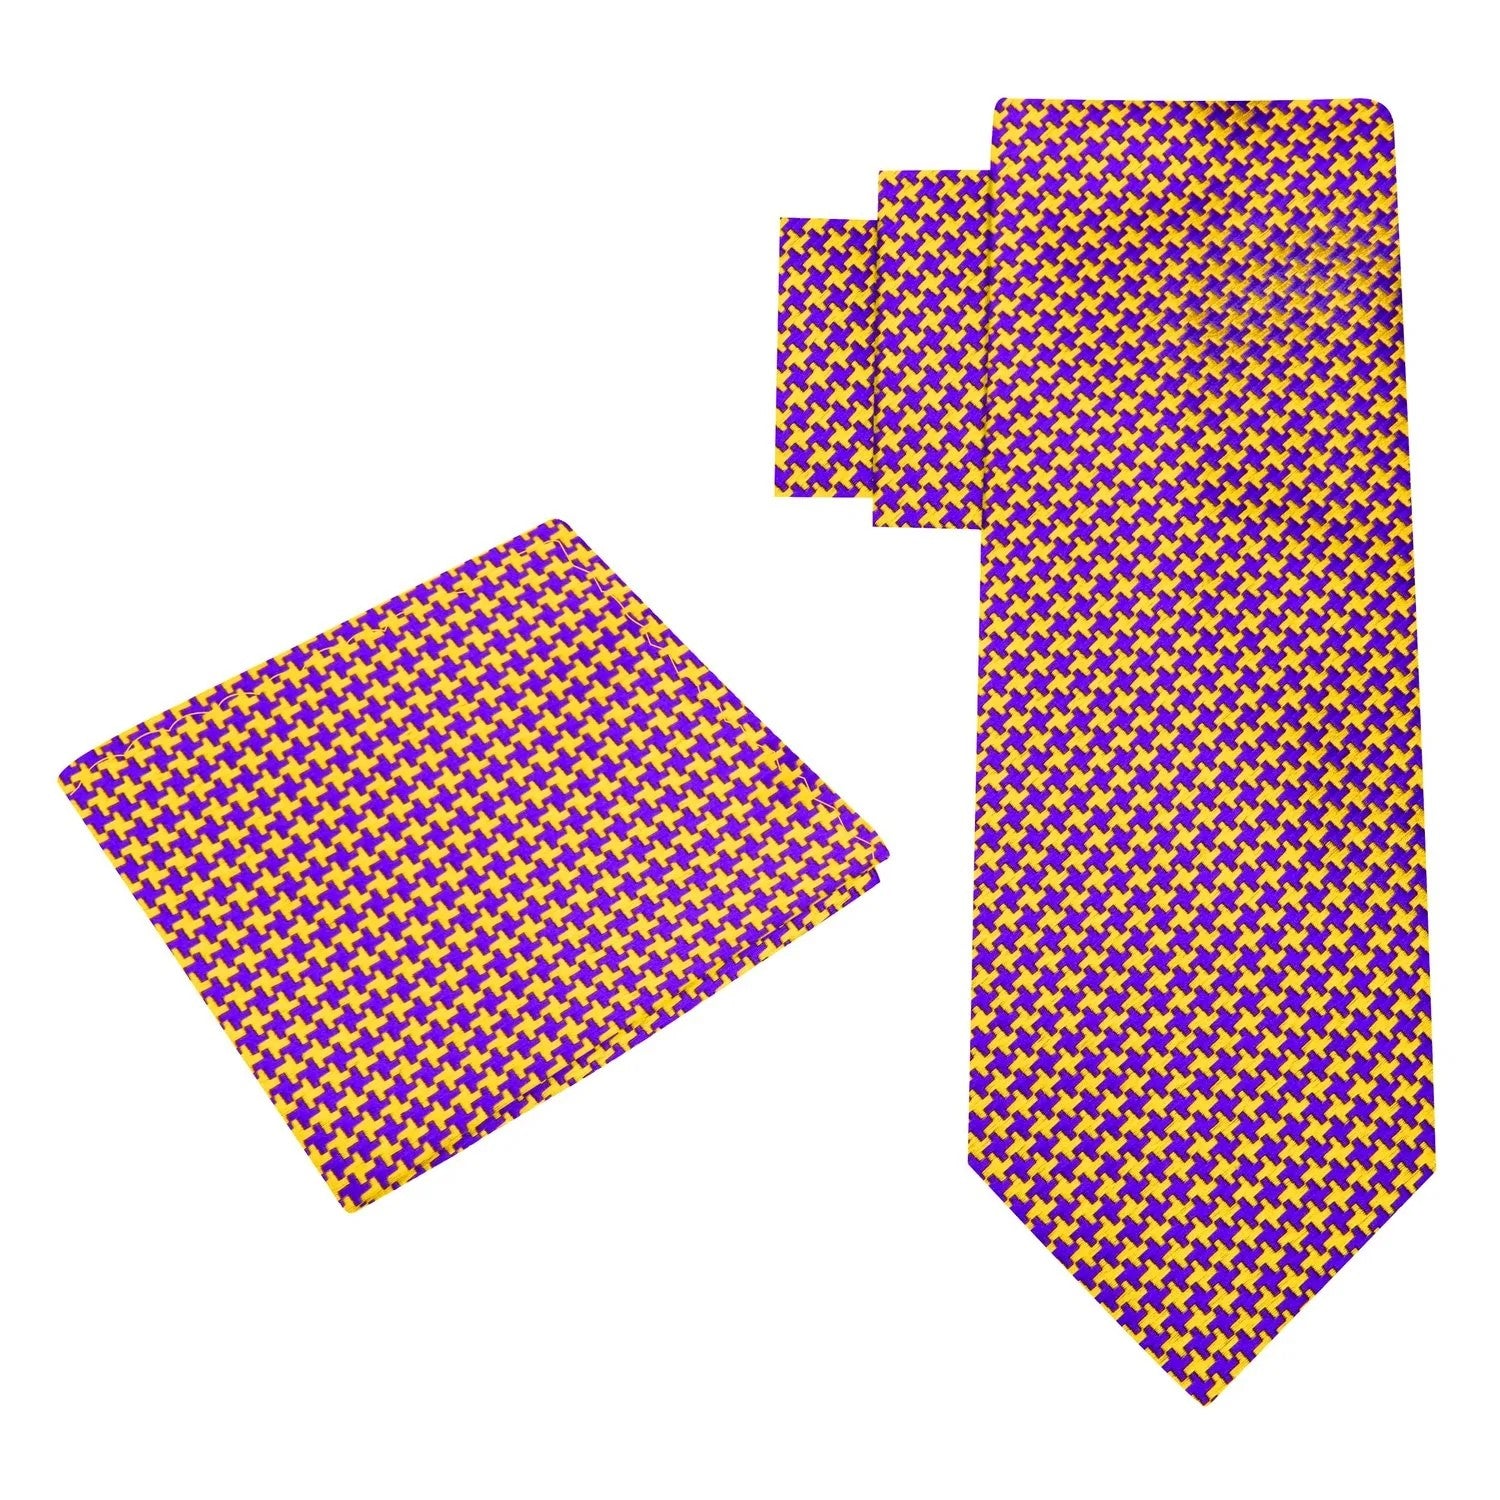 Alt View: Gold and Purple Hounds-tooth Tie and Pocket Square